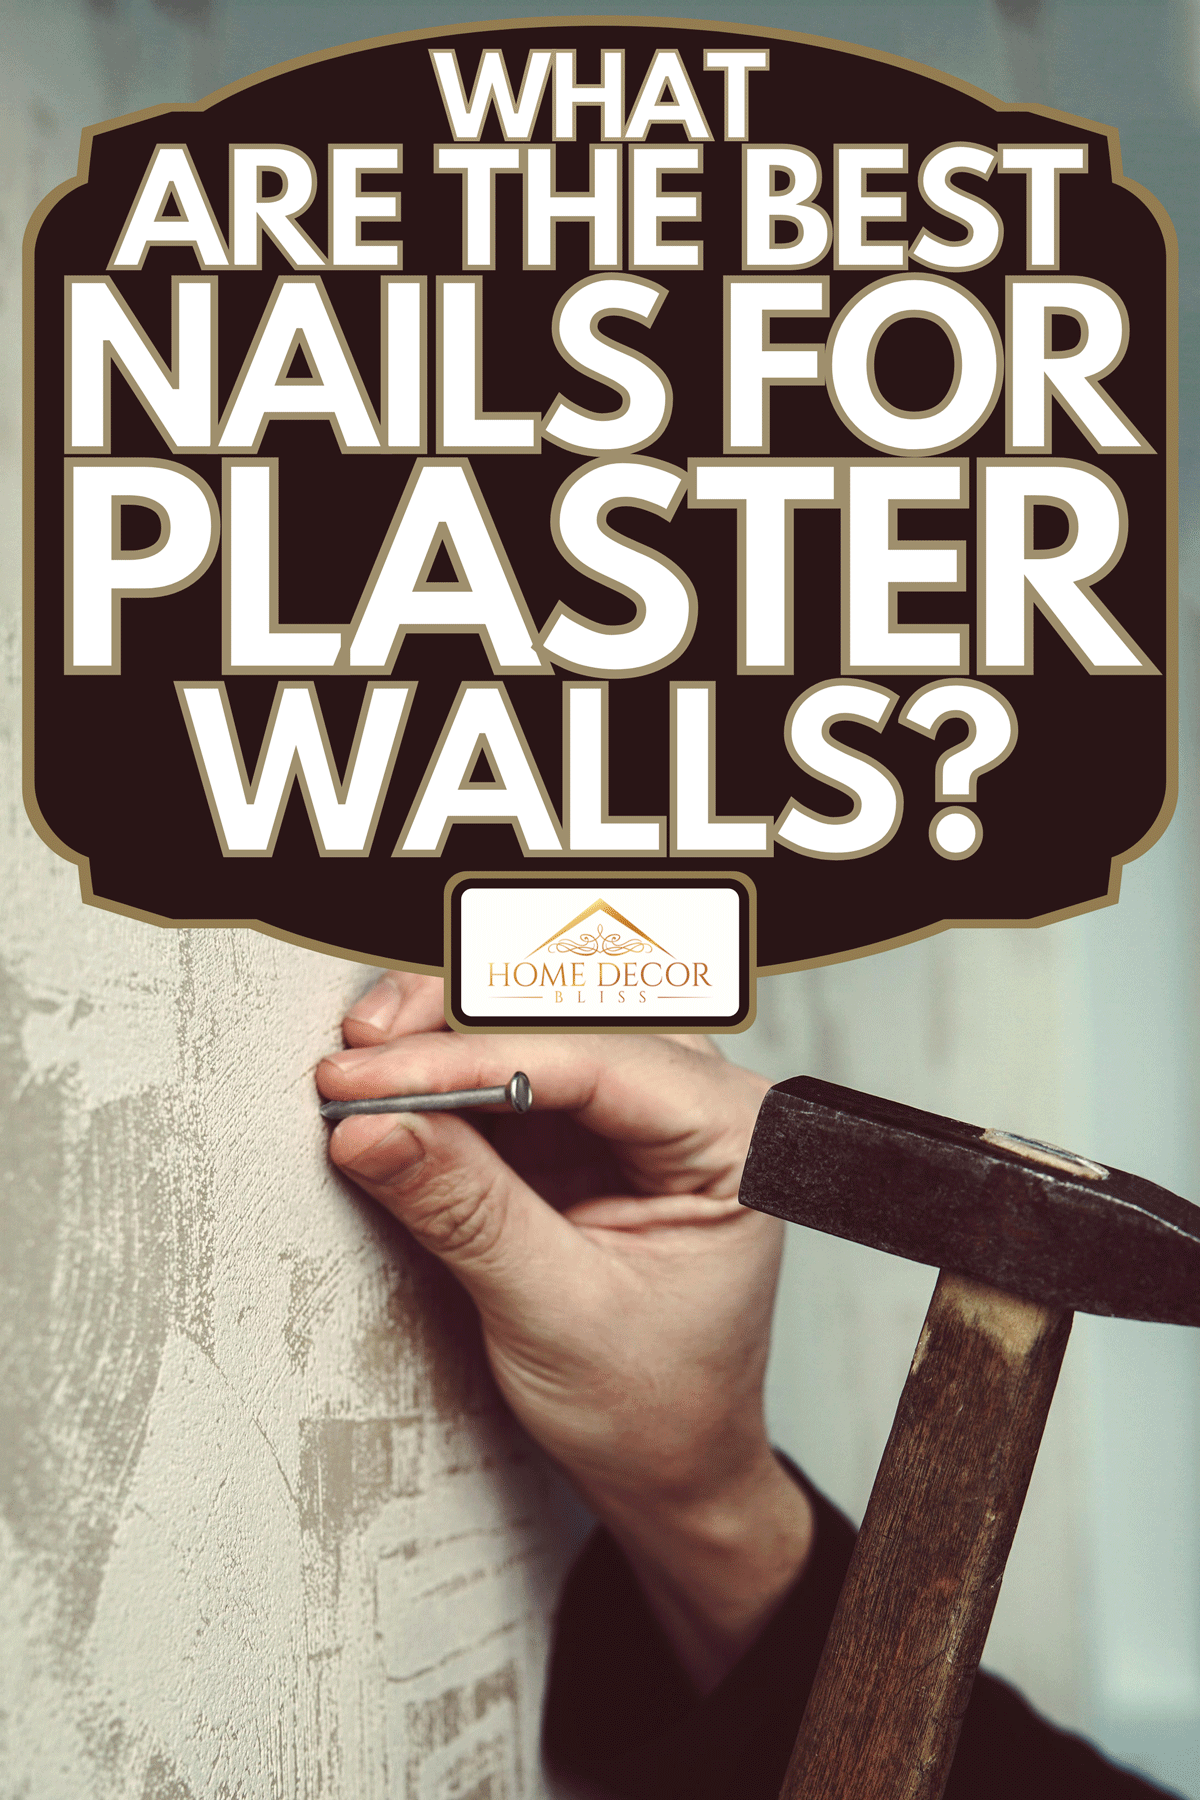 A guy hammering a nail in a plaster wall, What Are The Best Nails For Plaster Walls?